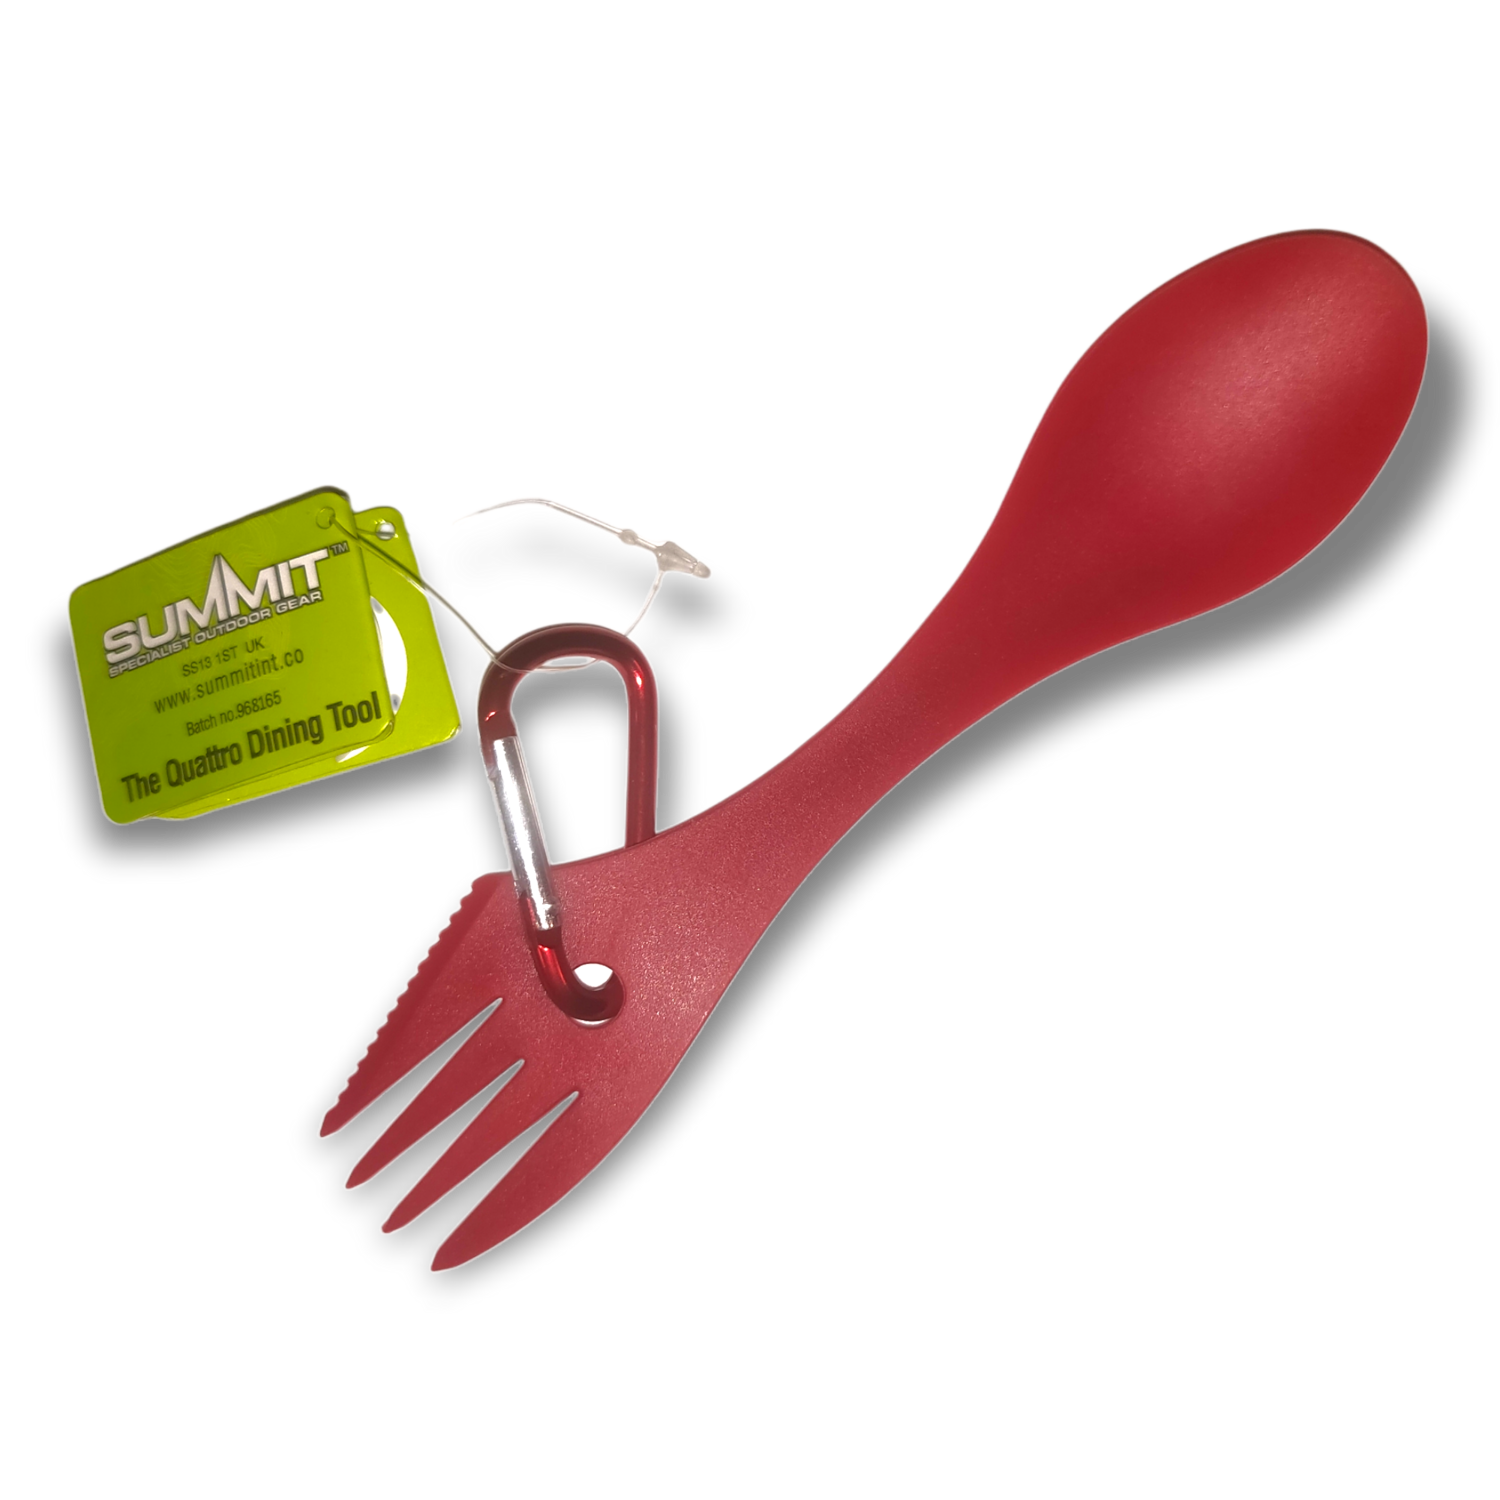 Red Quattro Cutlery All-In-1 Knife, Fork & Spoon! Summit Brand